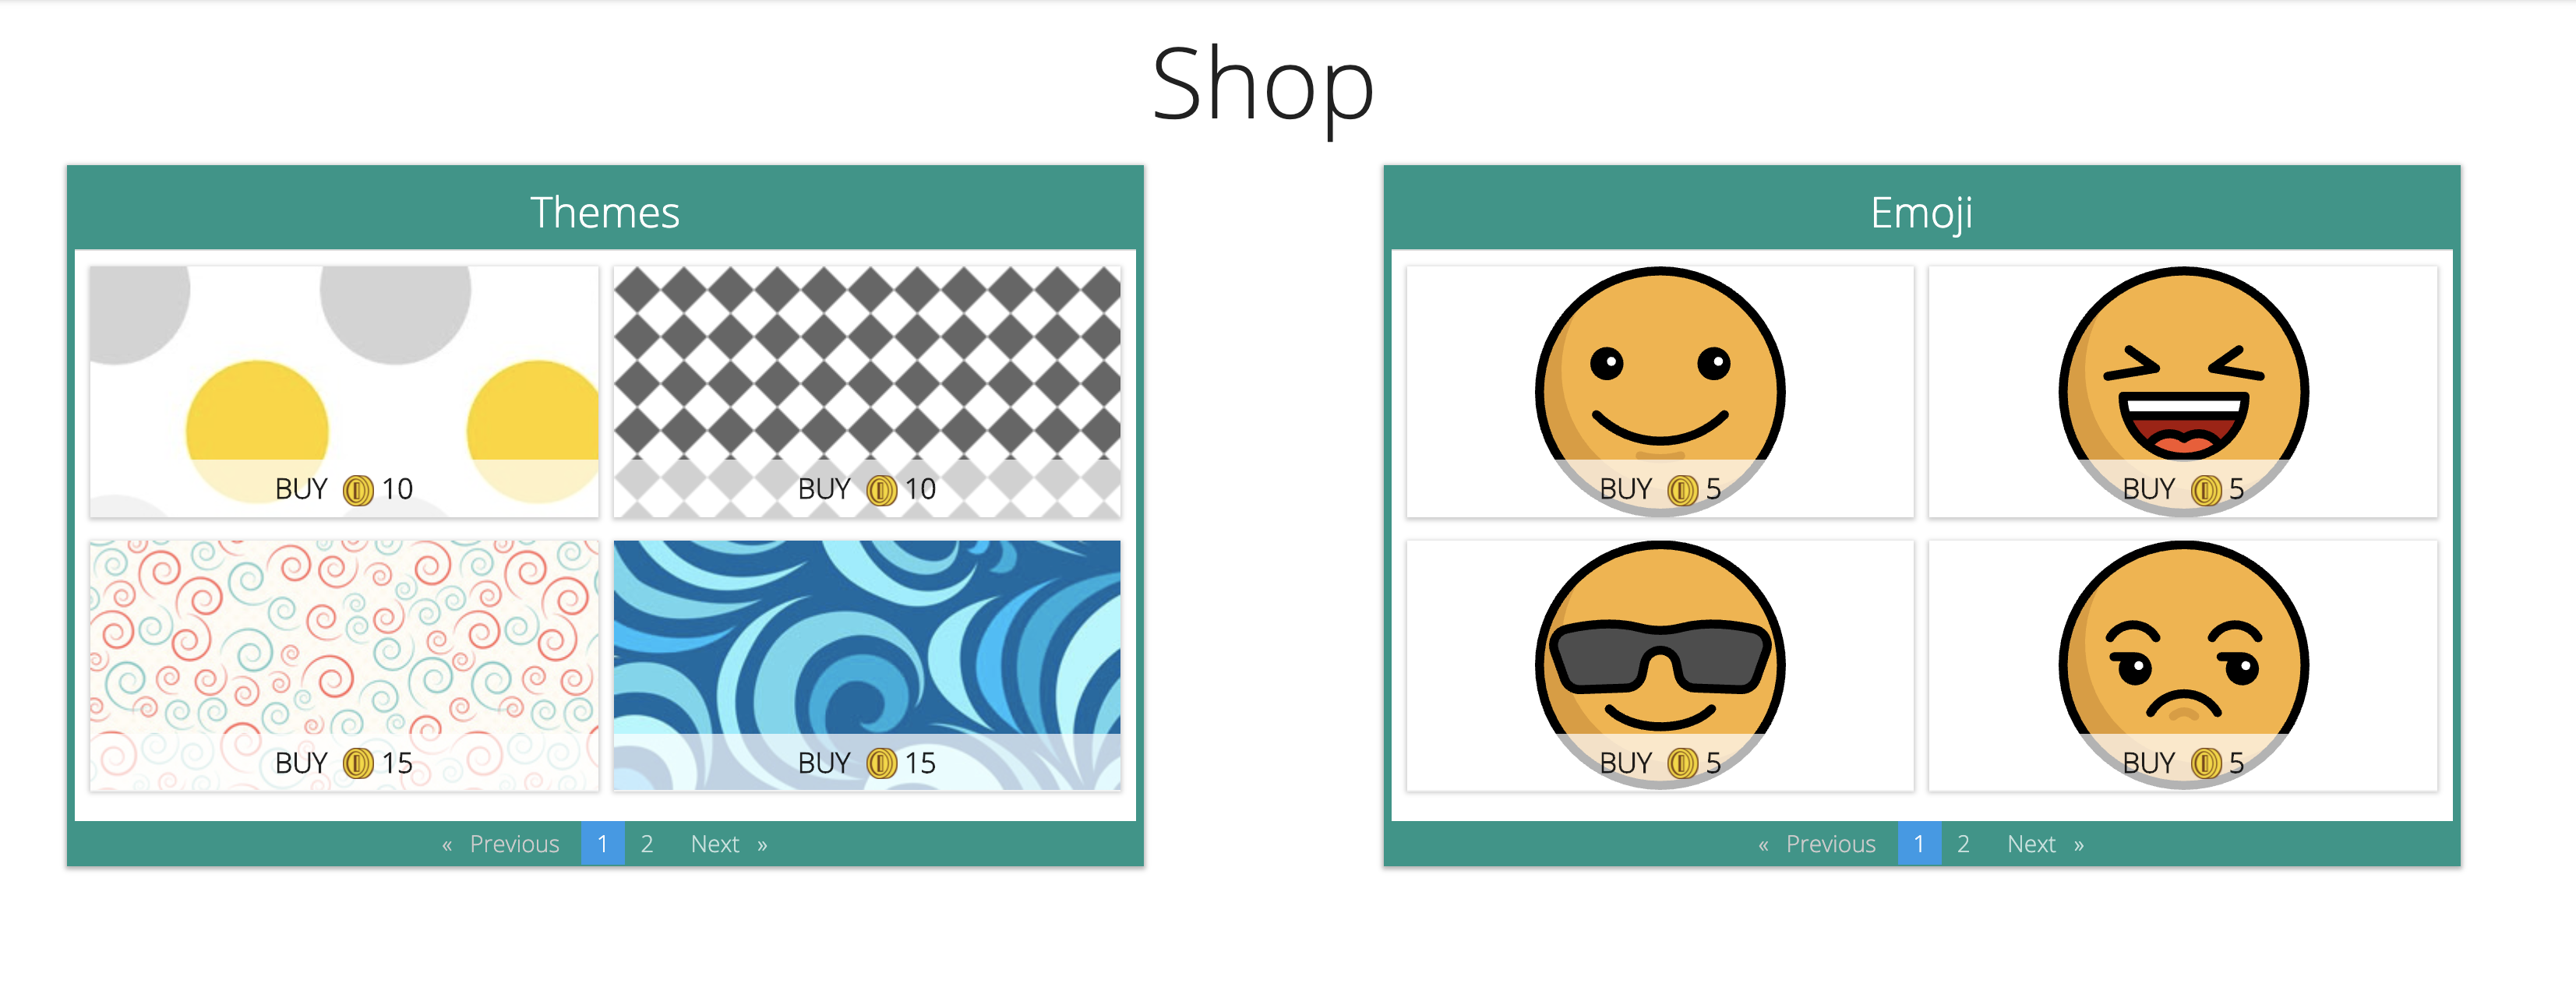 Shop page contains emojis and website background/themes